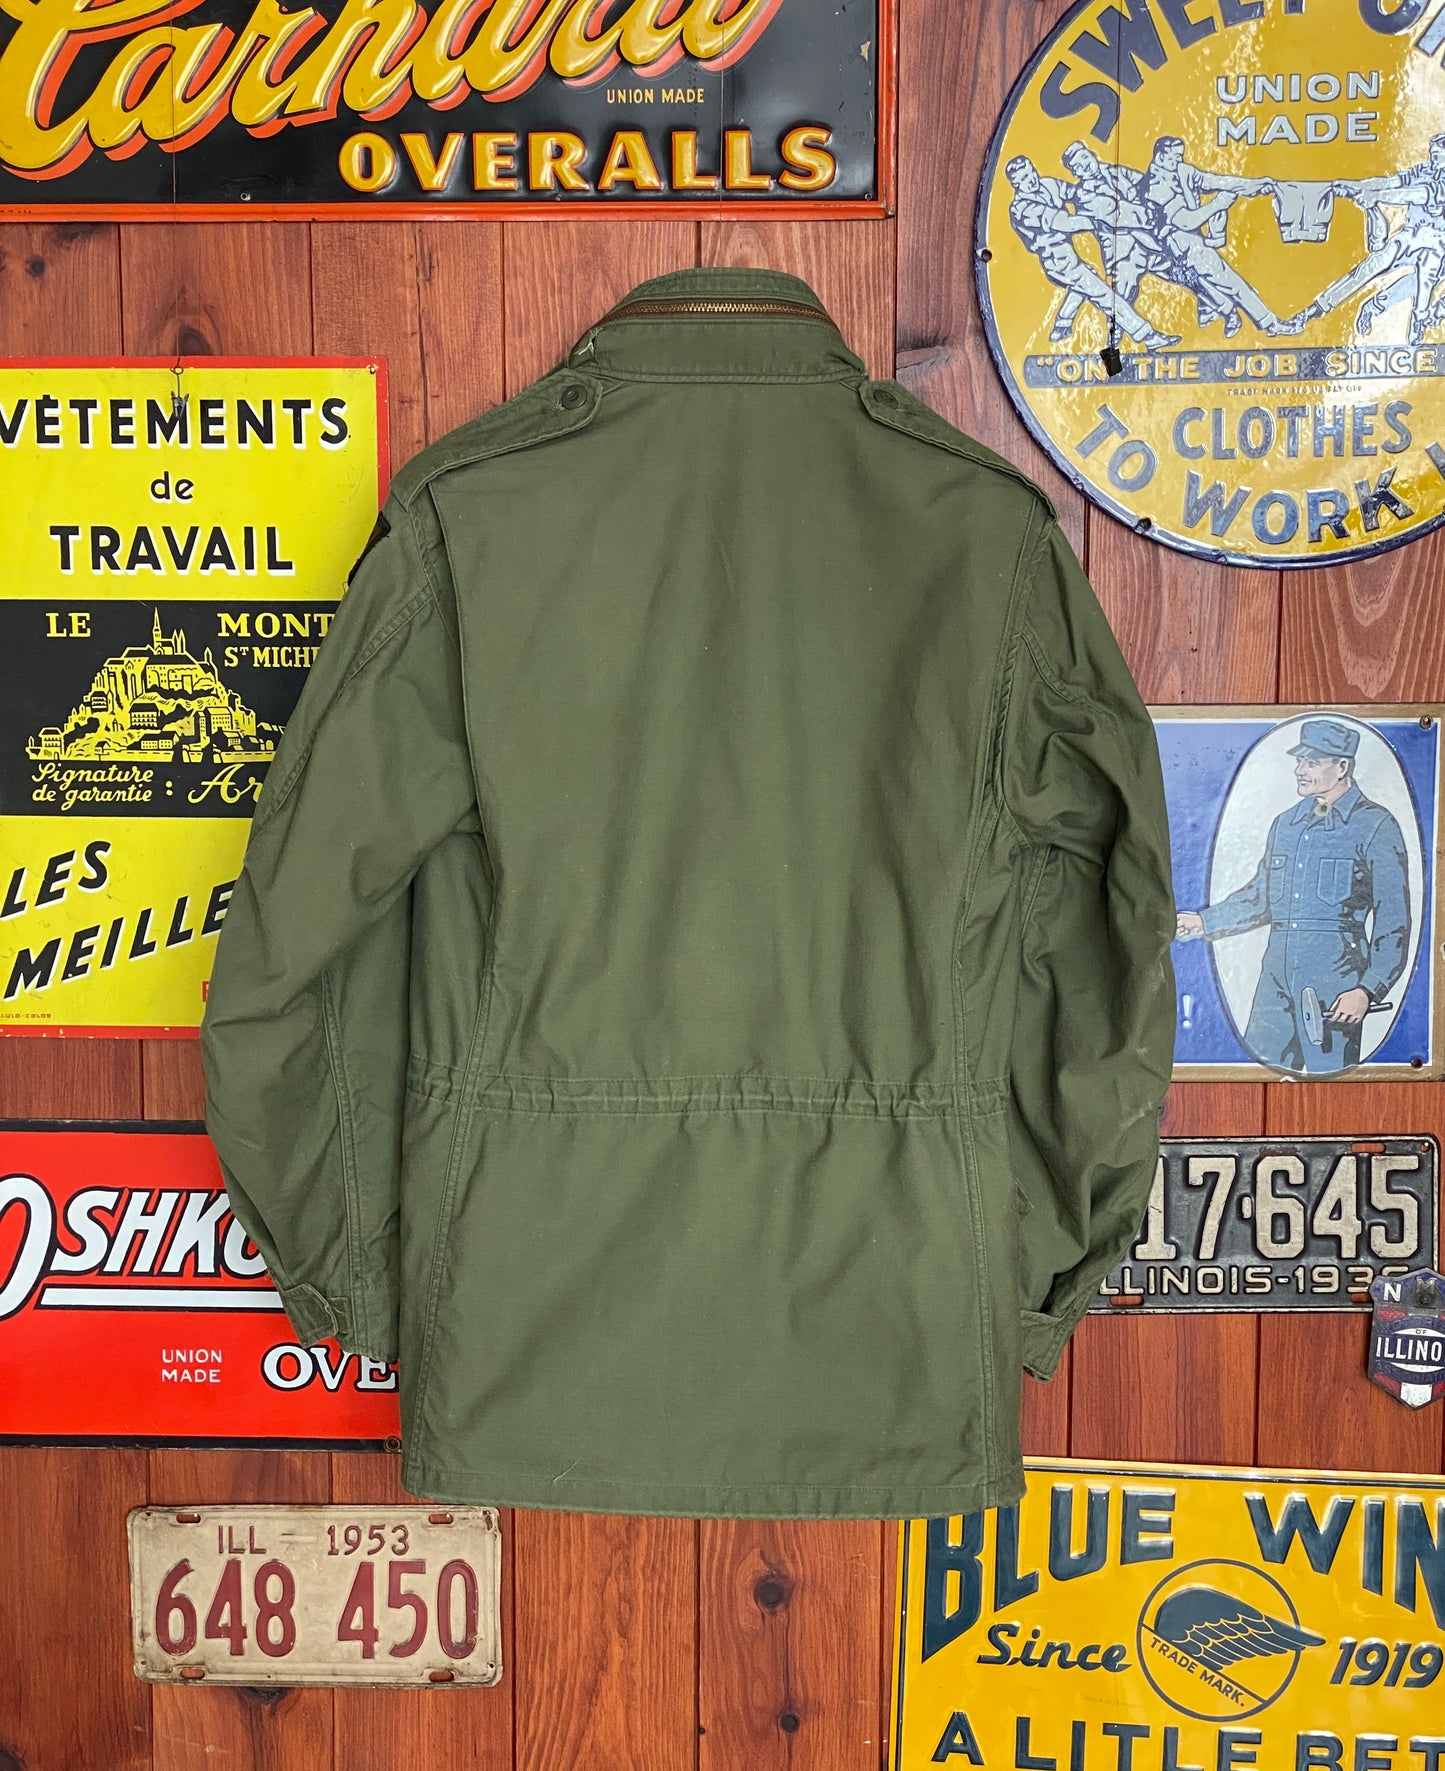 Authentic 1978 US Army Vintage M-65 Field Jacket in Olive Green | Classic Military Apparel with Timeless Style and Durability